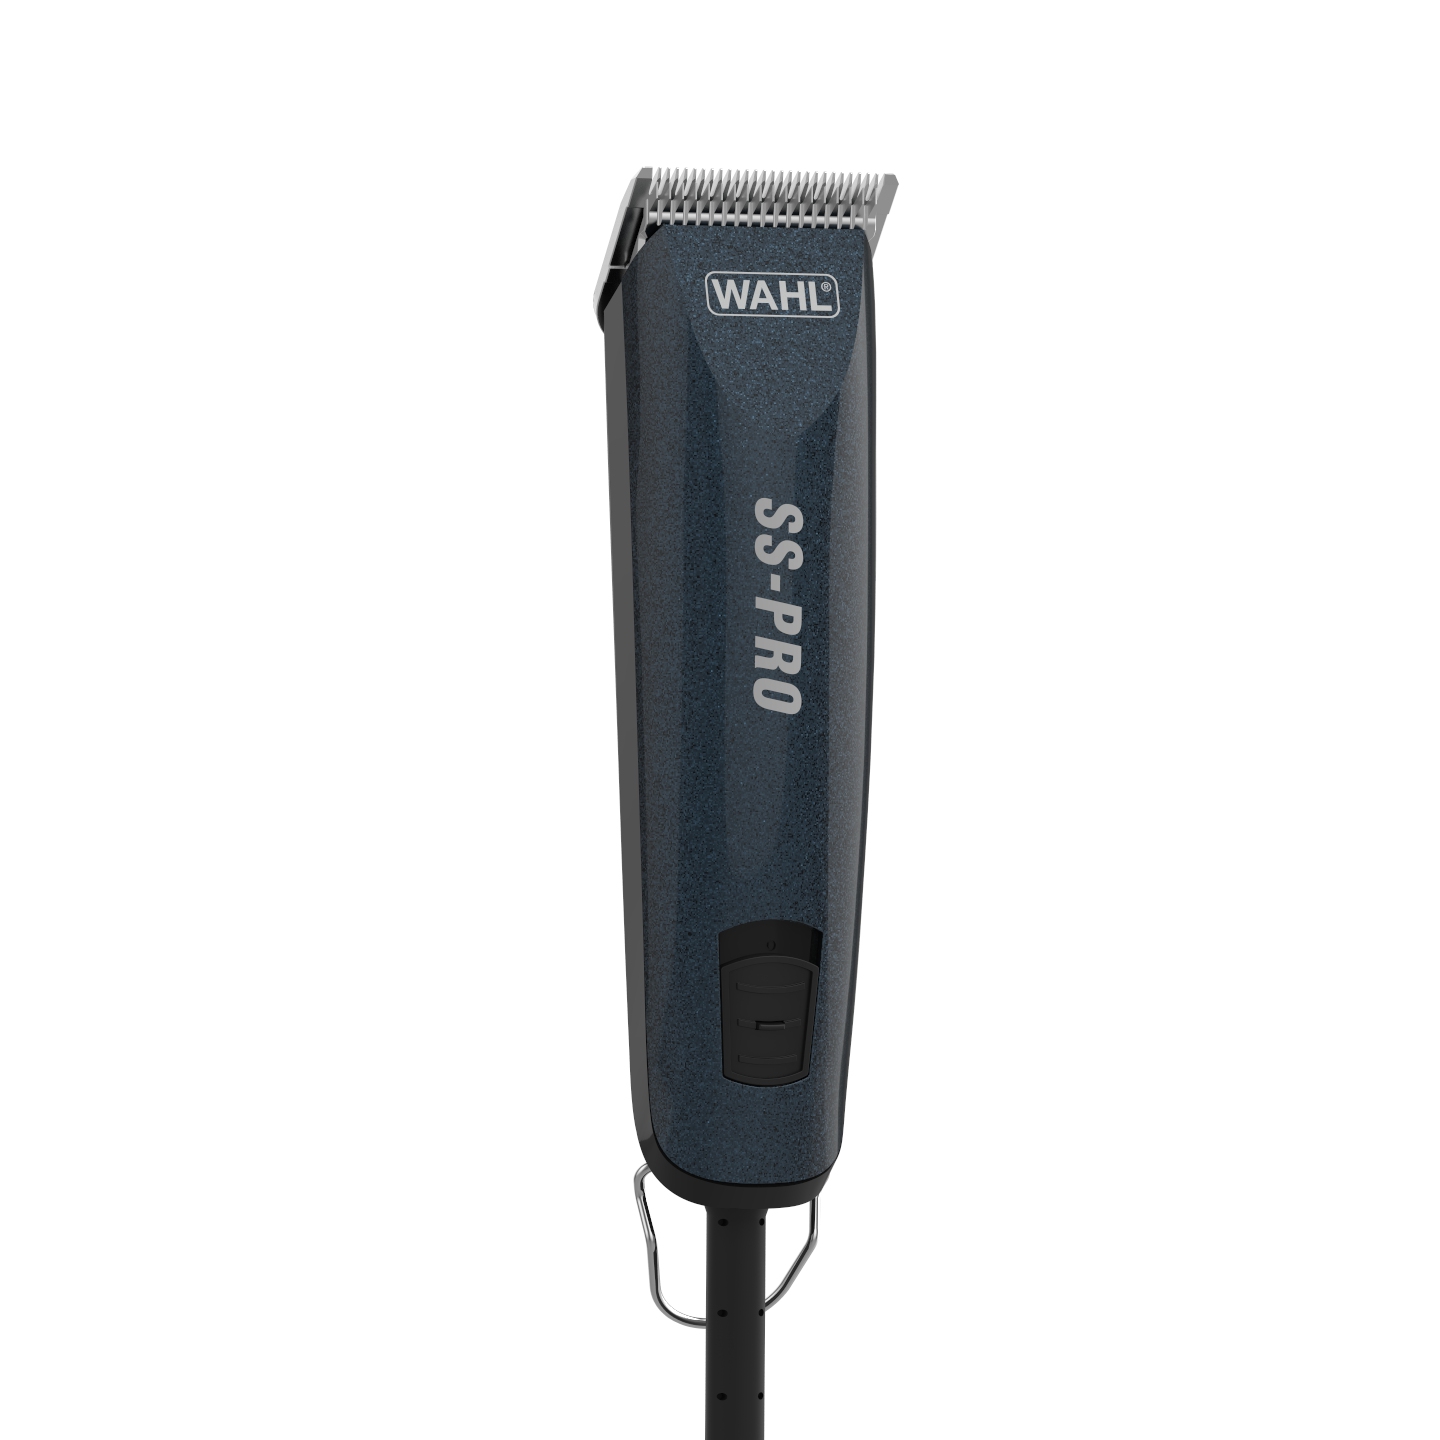 wahl ss pro